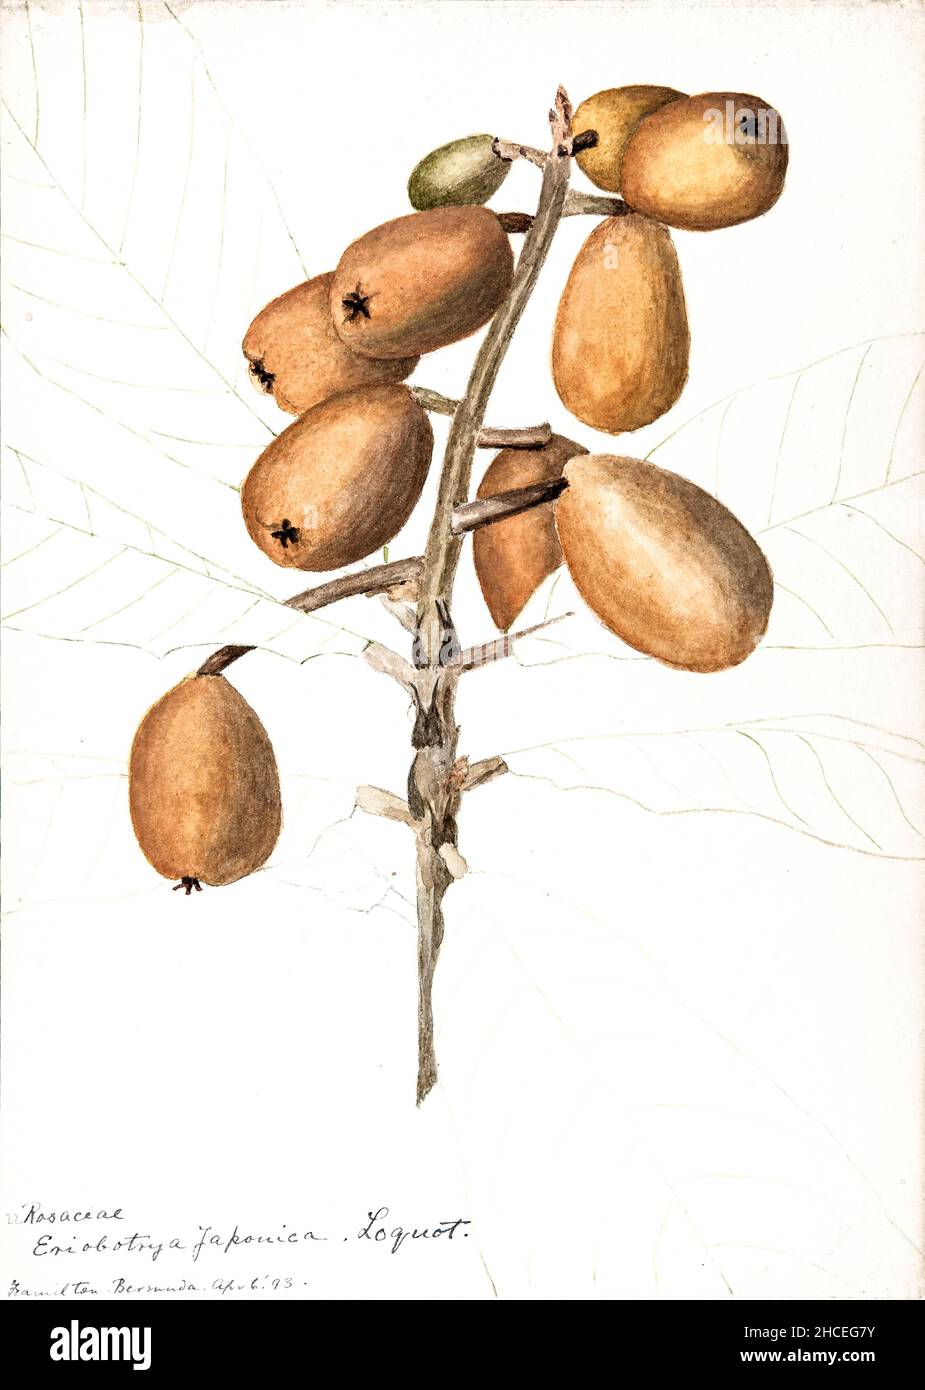 loquat (Eriobotrya japonica) is a large evergreen shrub or tree, grown commercially for its orange fruit and for its leaves, which are used to make tea. It is also cultivated as an ornamental plant. Sketchbook No. 18 - Fruits and Flowers of Bermuda by Helen Sharp 1892-1903 Stock Photo